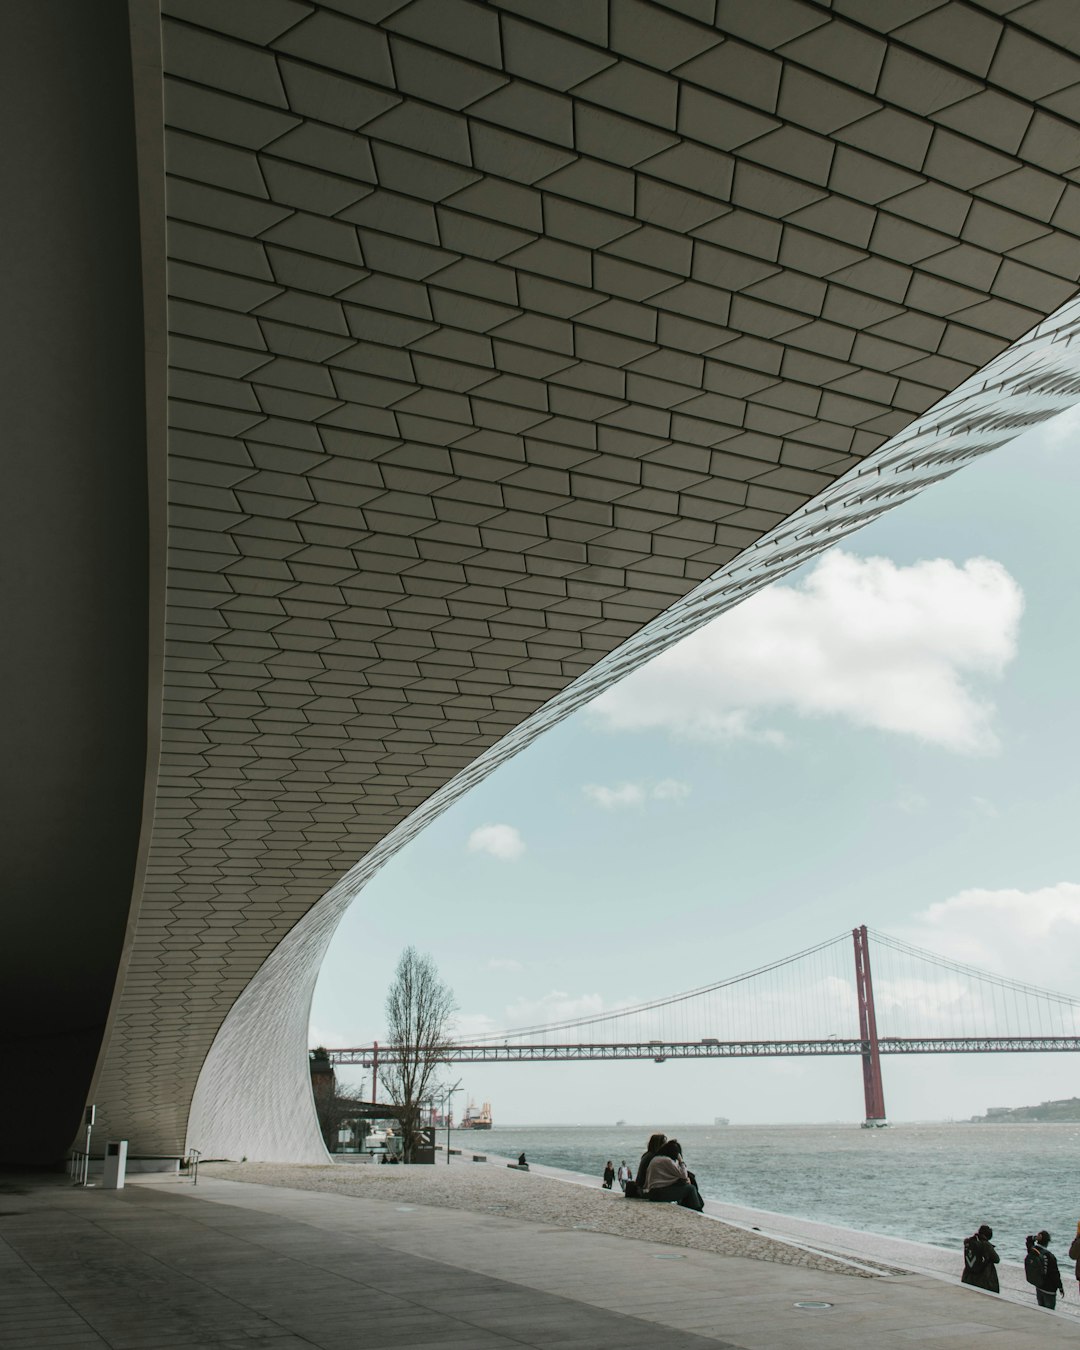 travelers stories about Bridge in Lisbon, Portugal